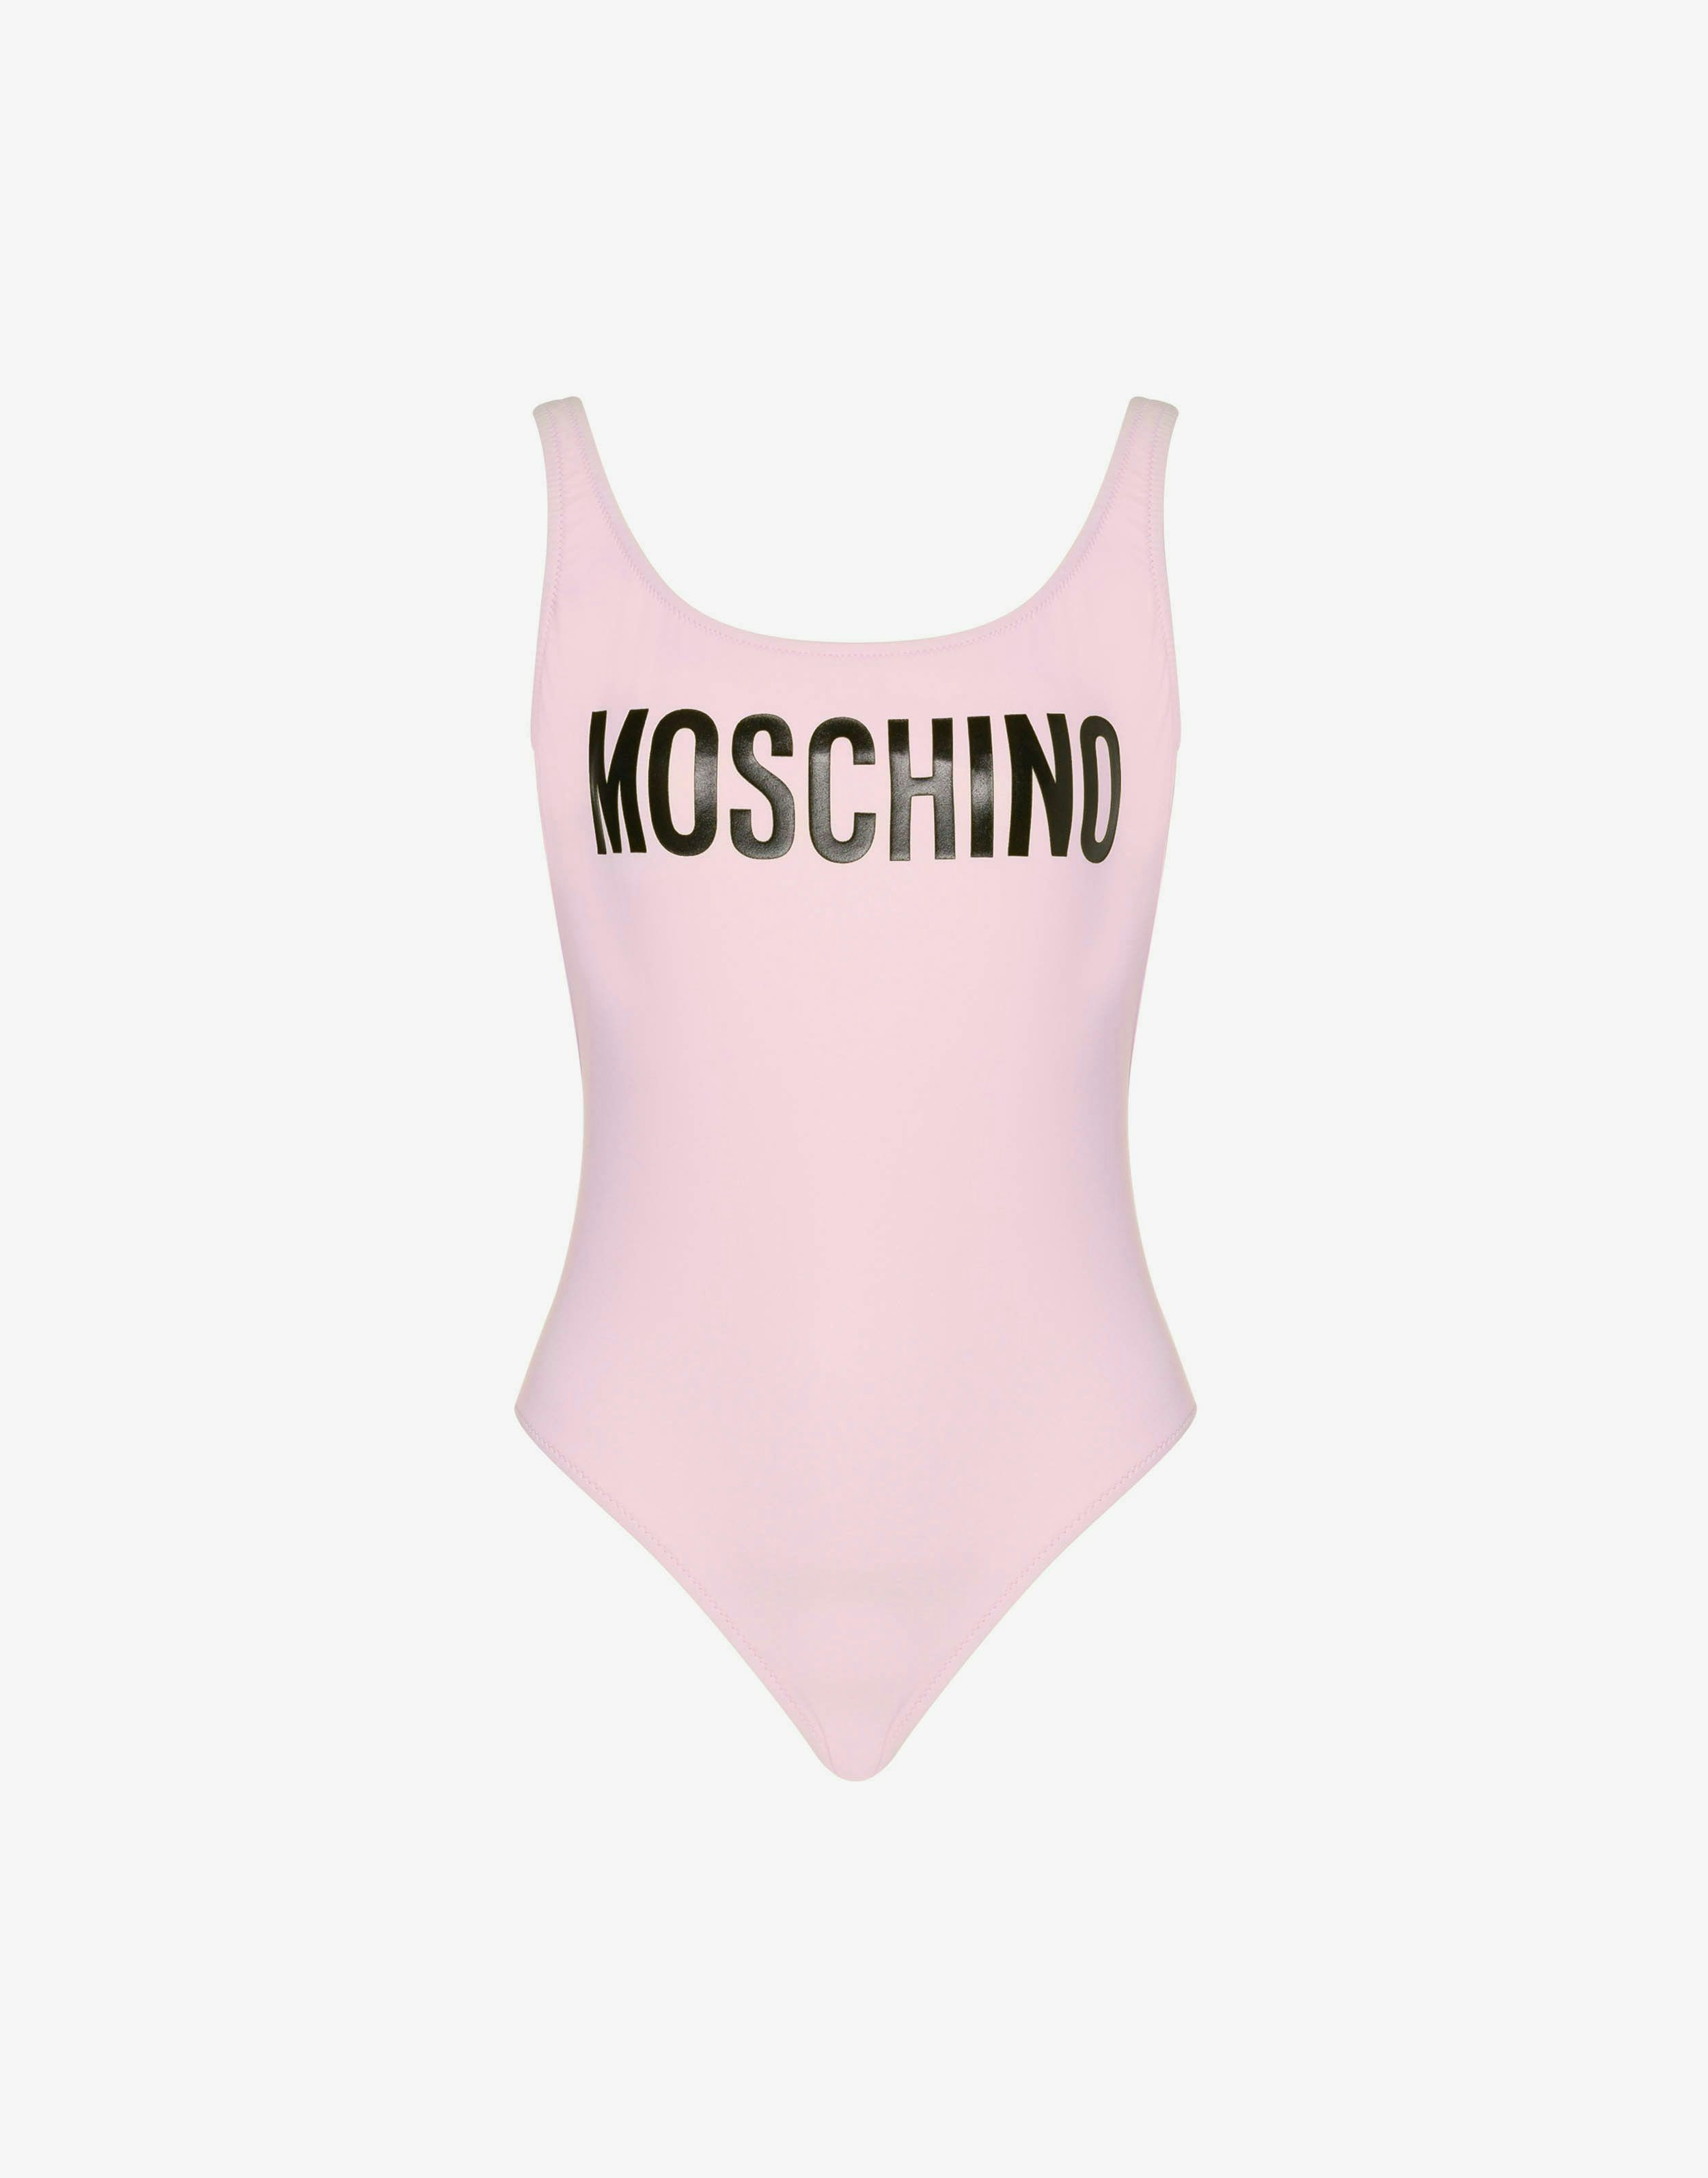 Moschino Moschino Pink Swimsuit with Metal Detailing Brand New with Tags Size S UK 10 